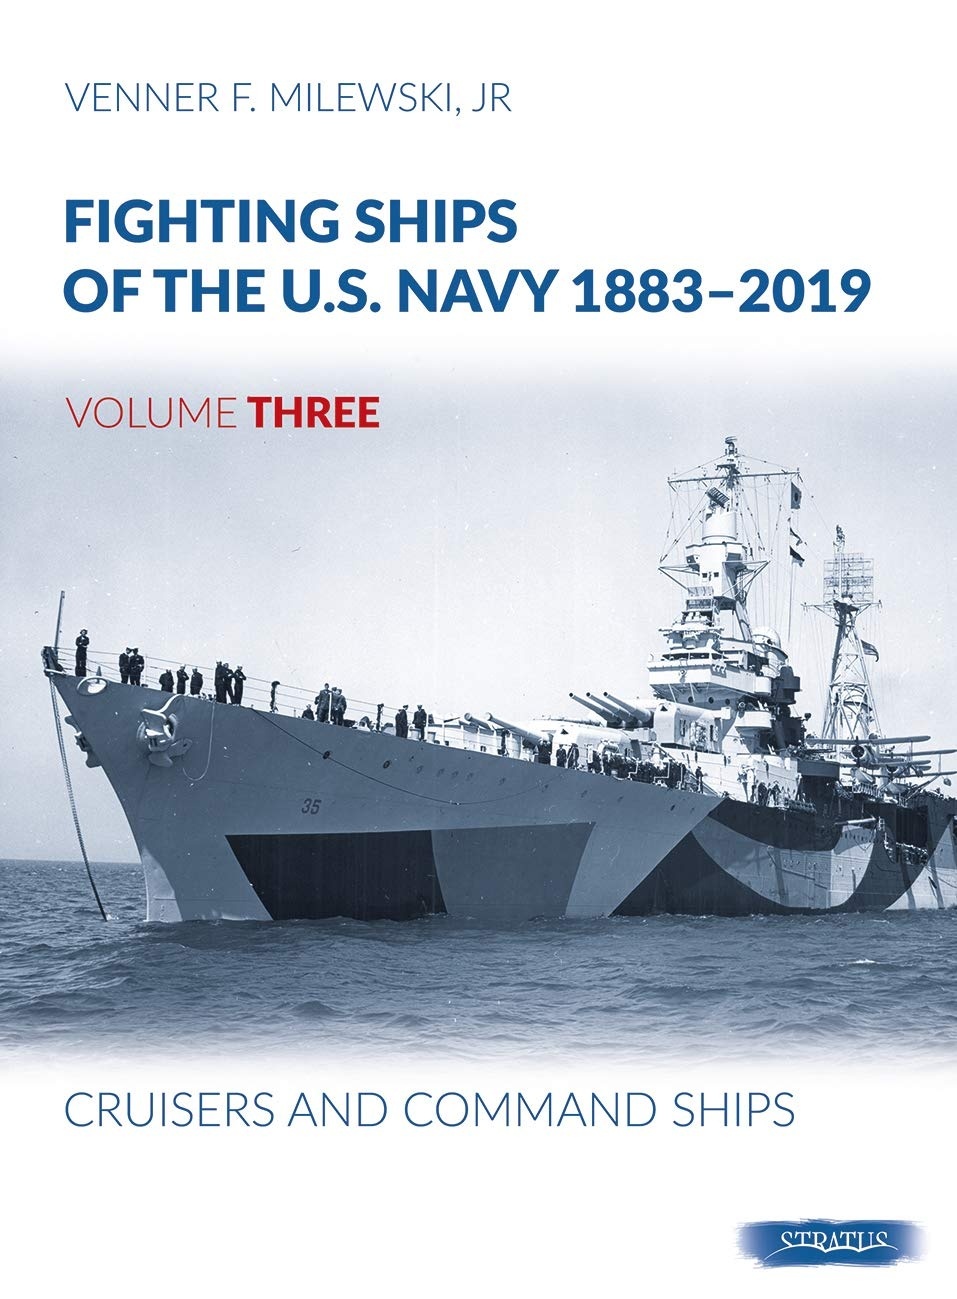 Vol I. Fighting Ships Of The U.S.Navy 1883-2019 Volume Three : Cruisers and Command Ships